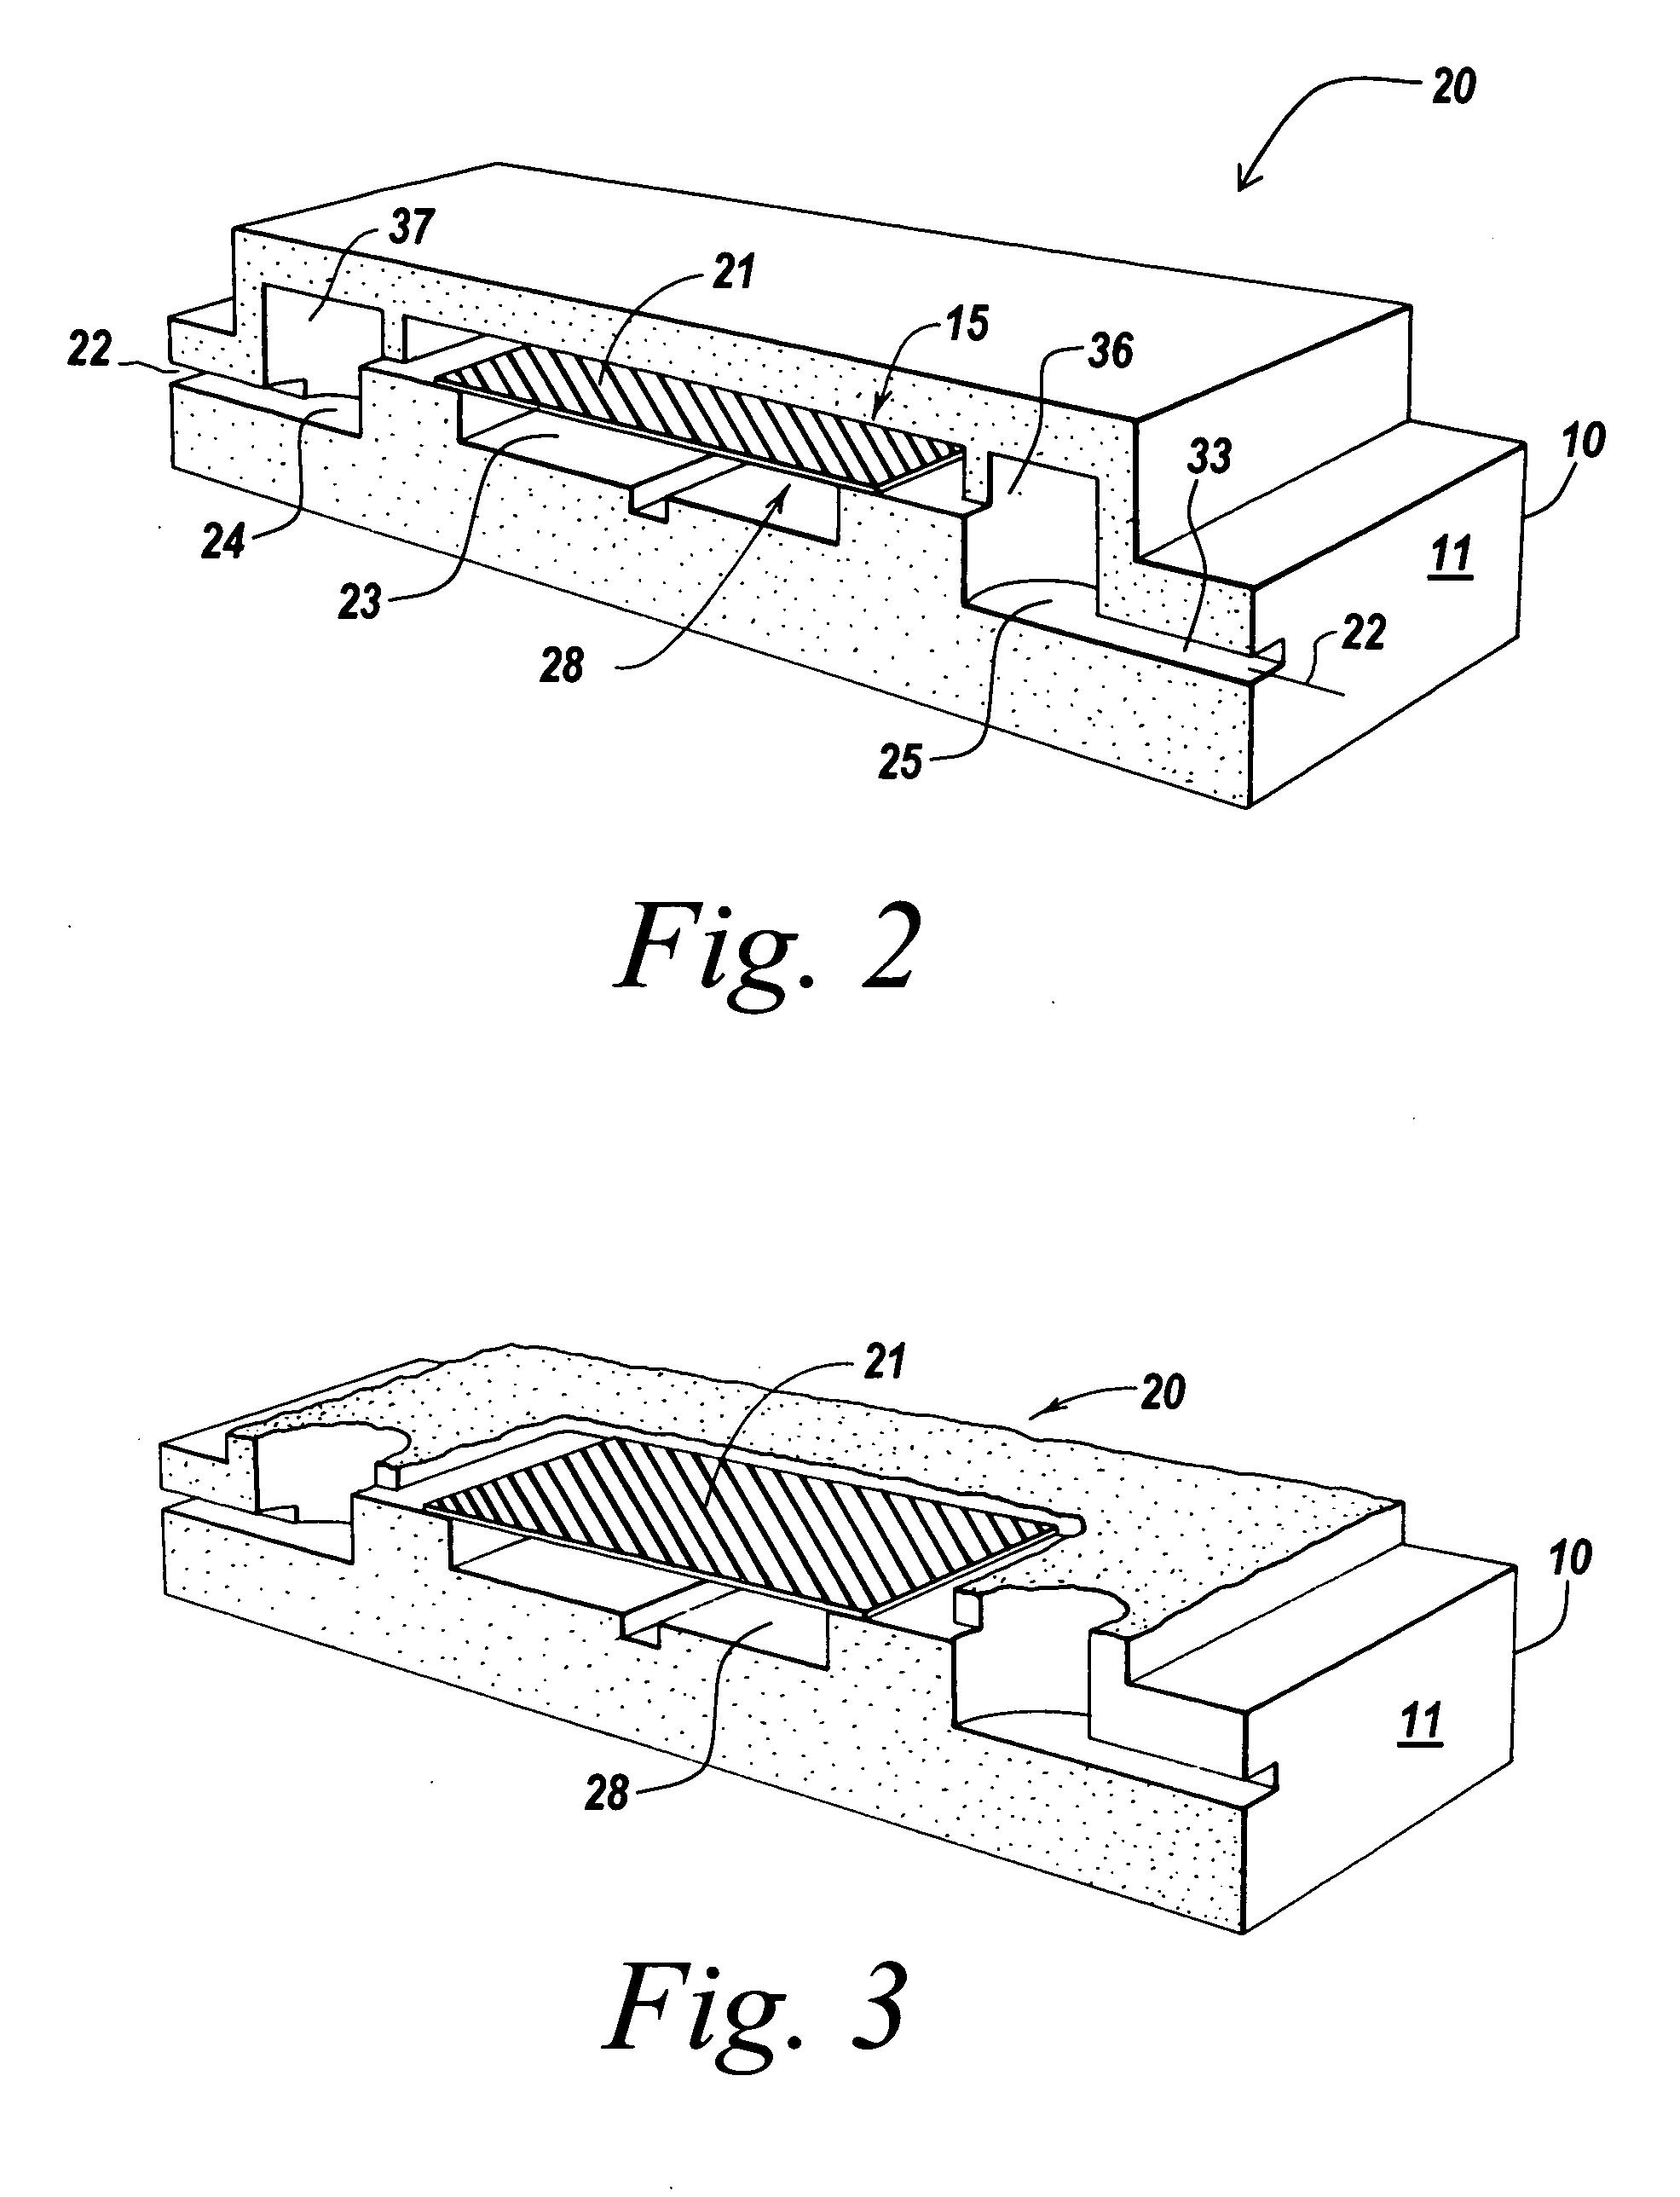 Implementation of microfluidic components, including molecular fractionation devices, in a microfluidic system